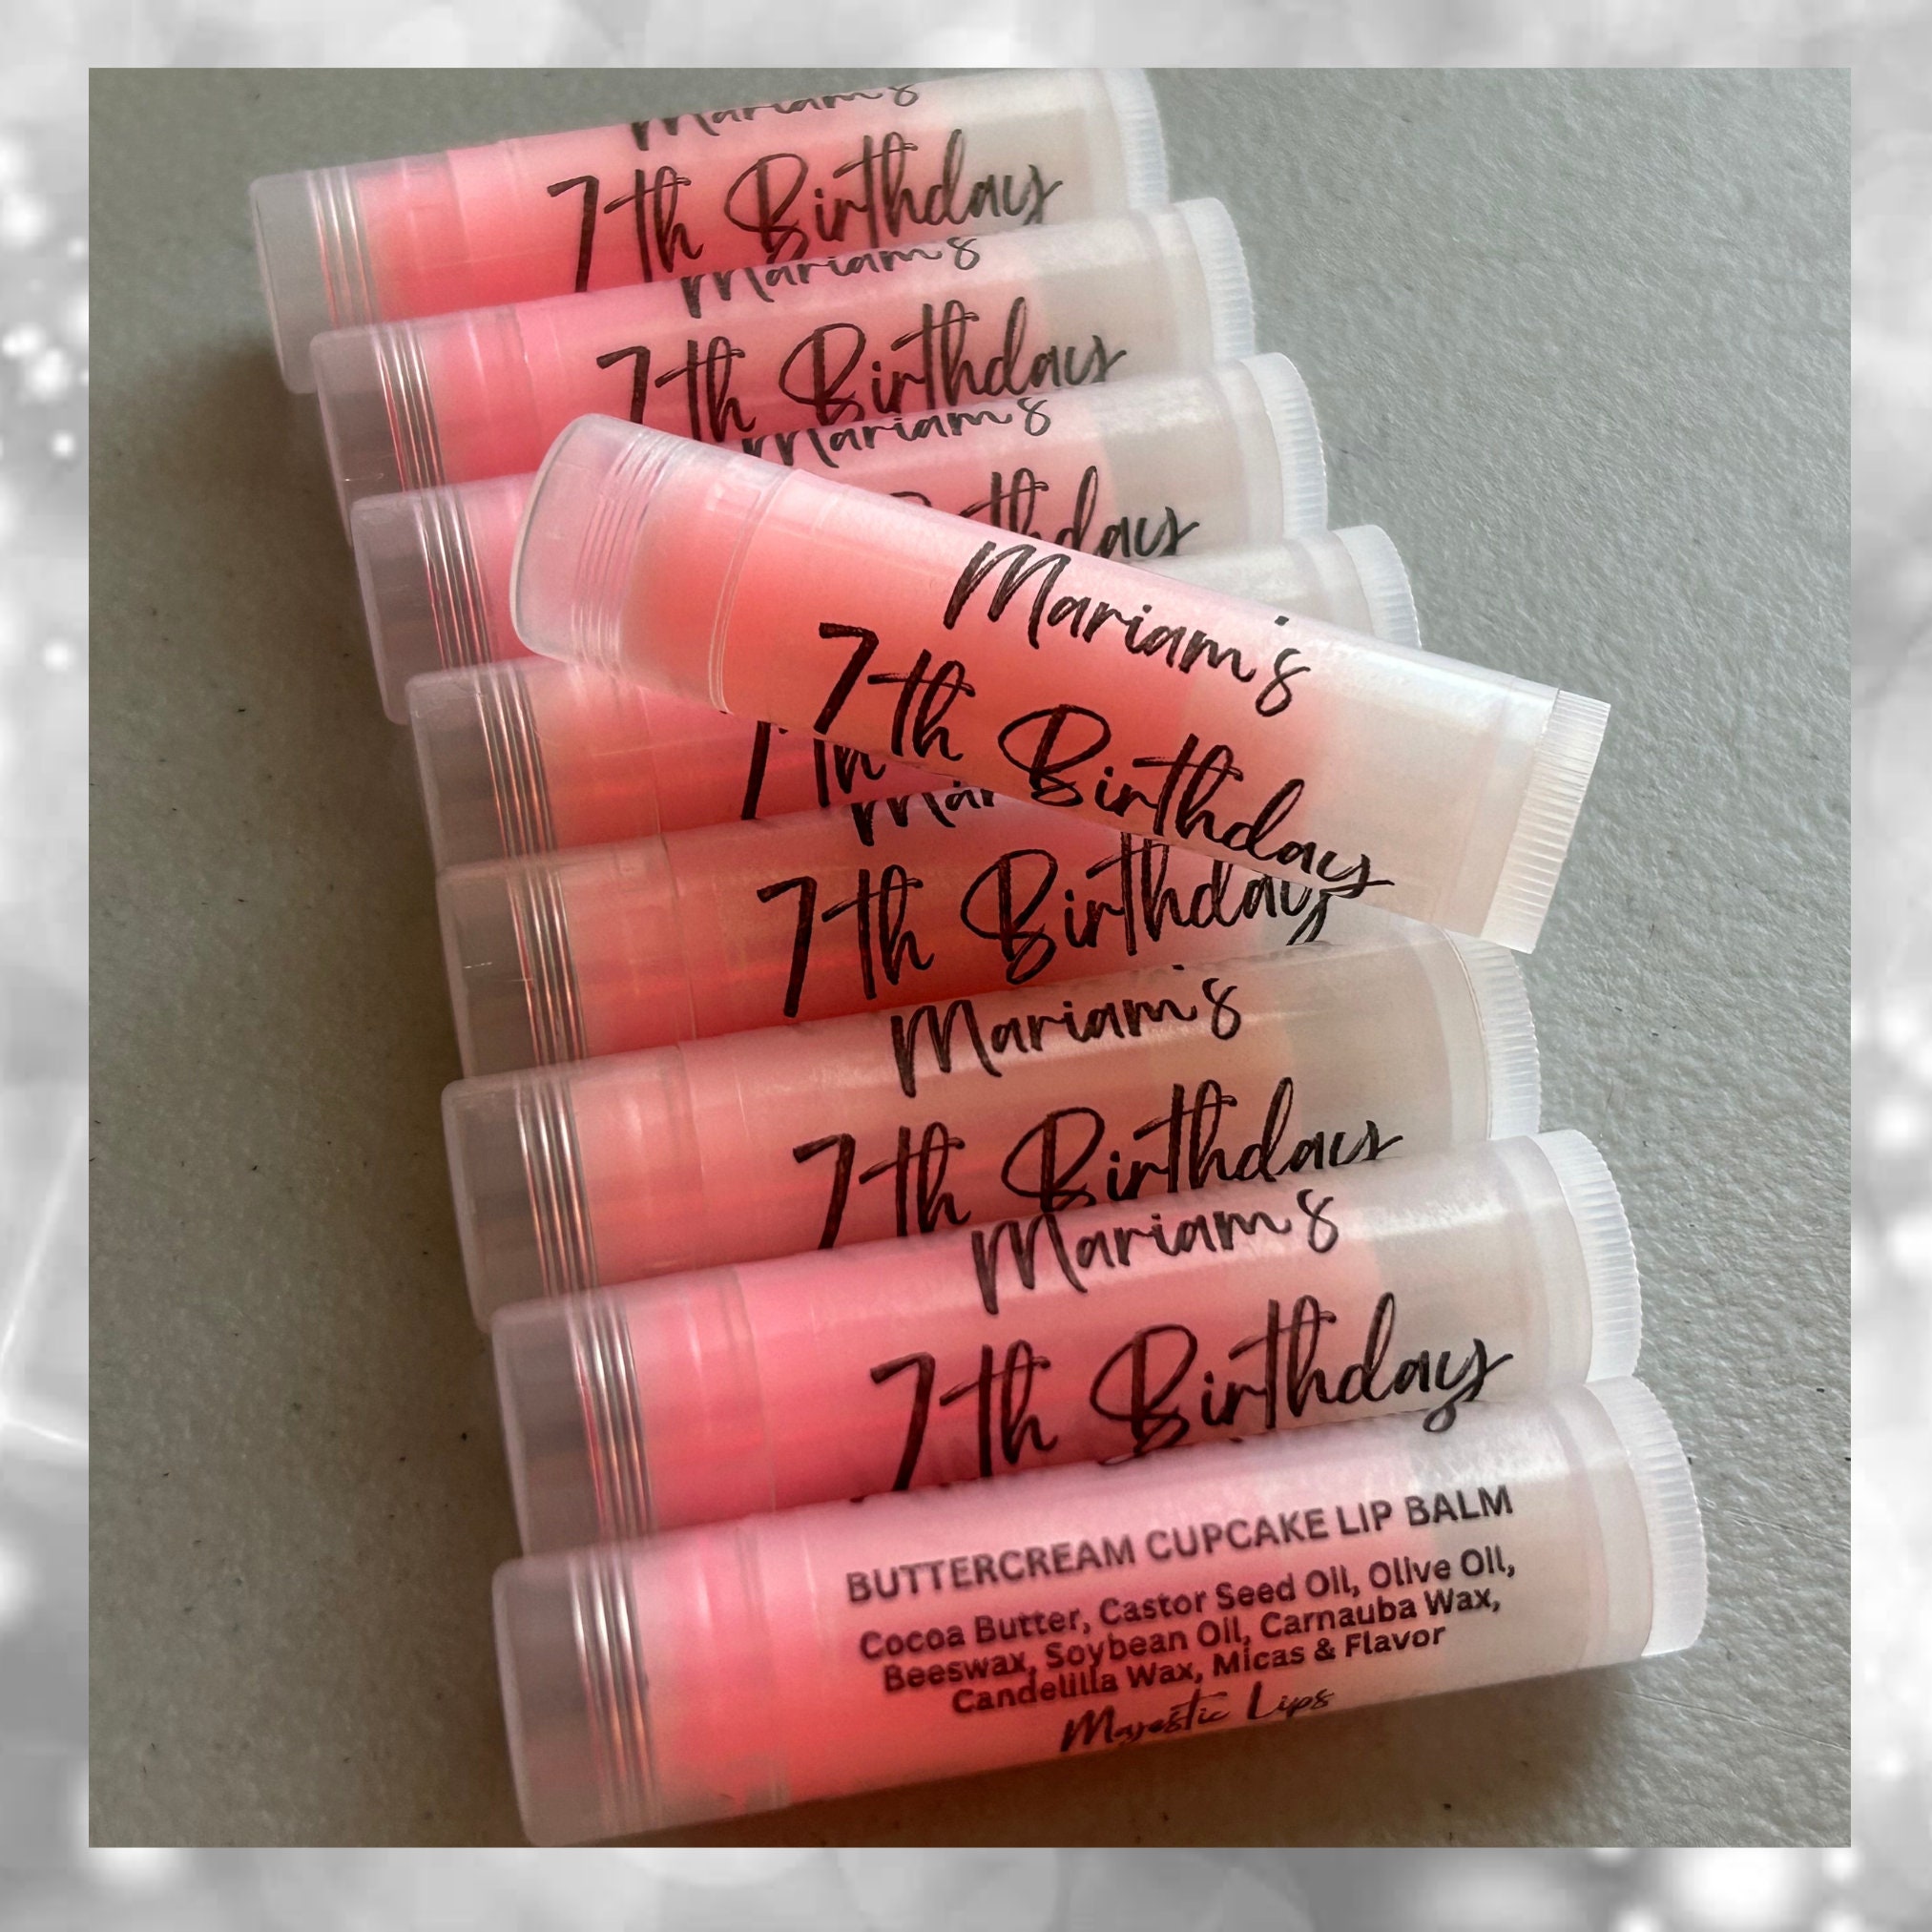  Lip Gloss Party Favors